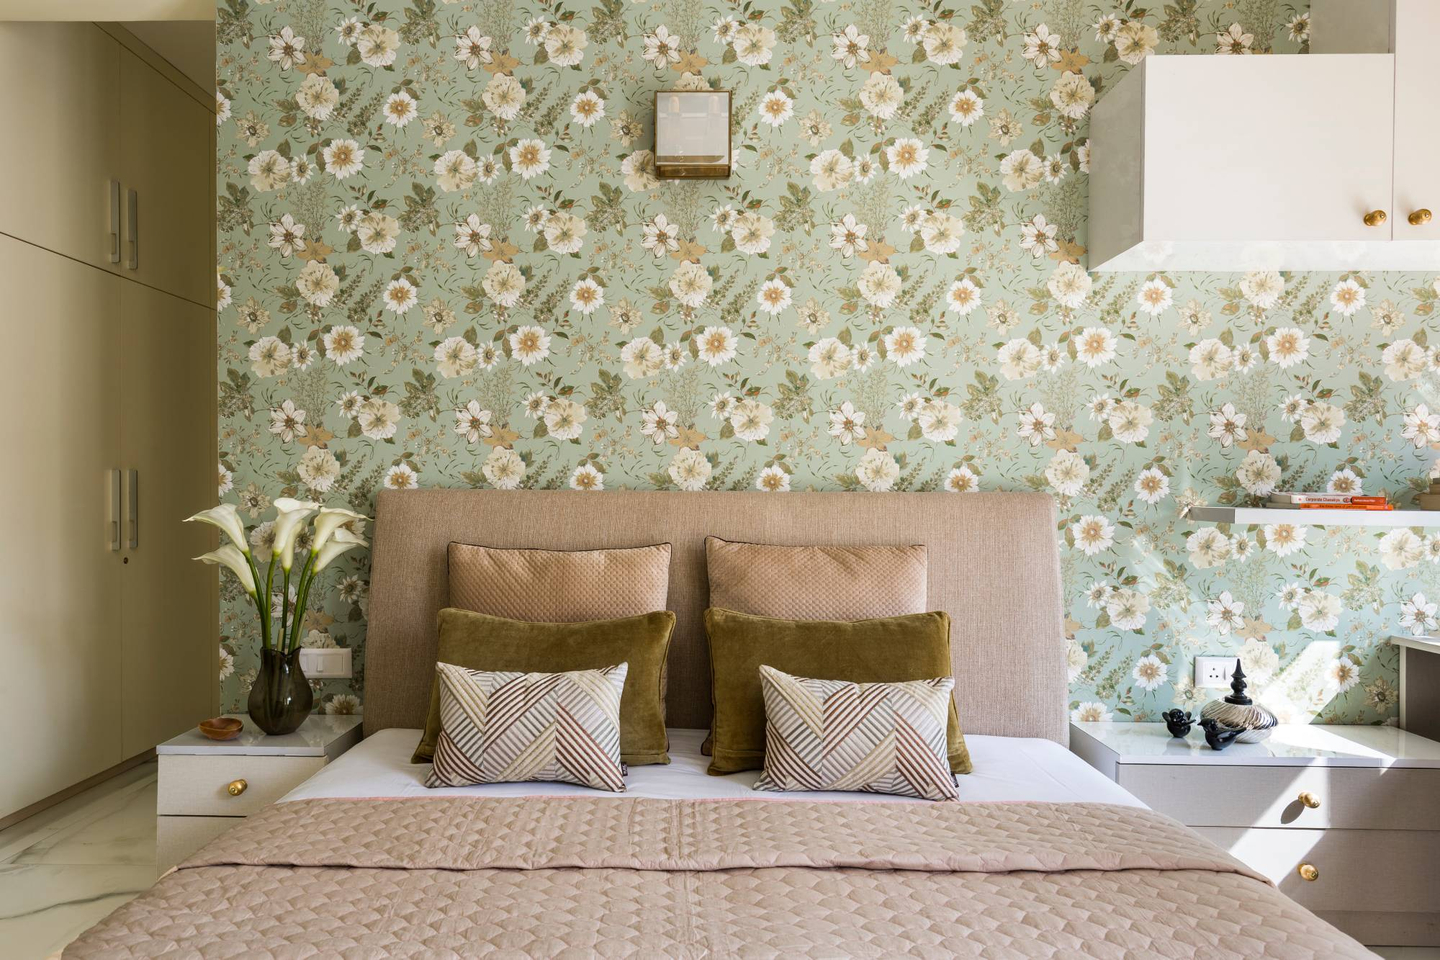 Guest Room With Floral Wallpaper - Livspace